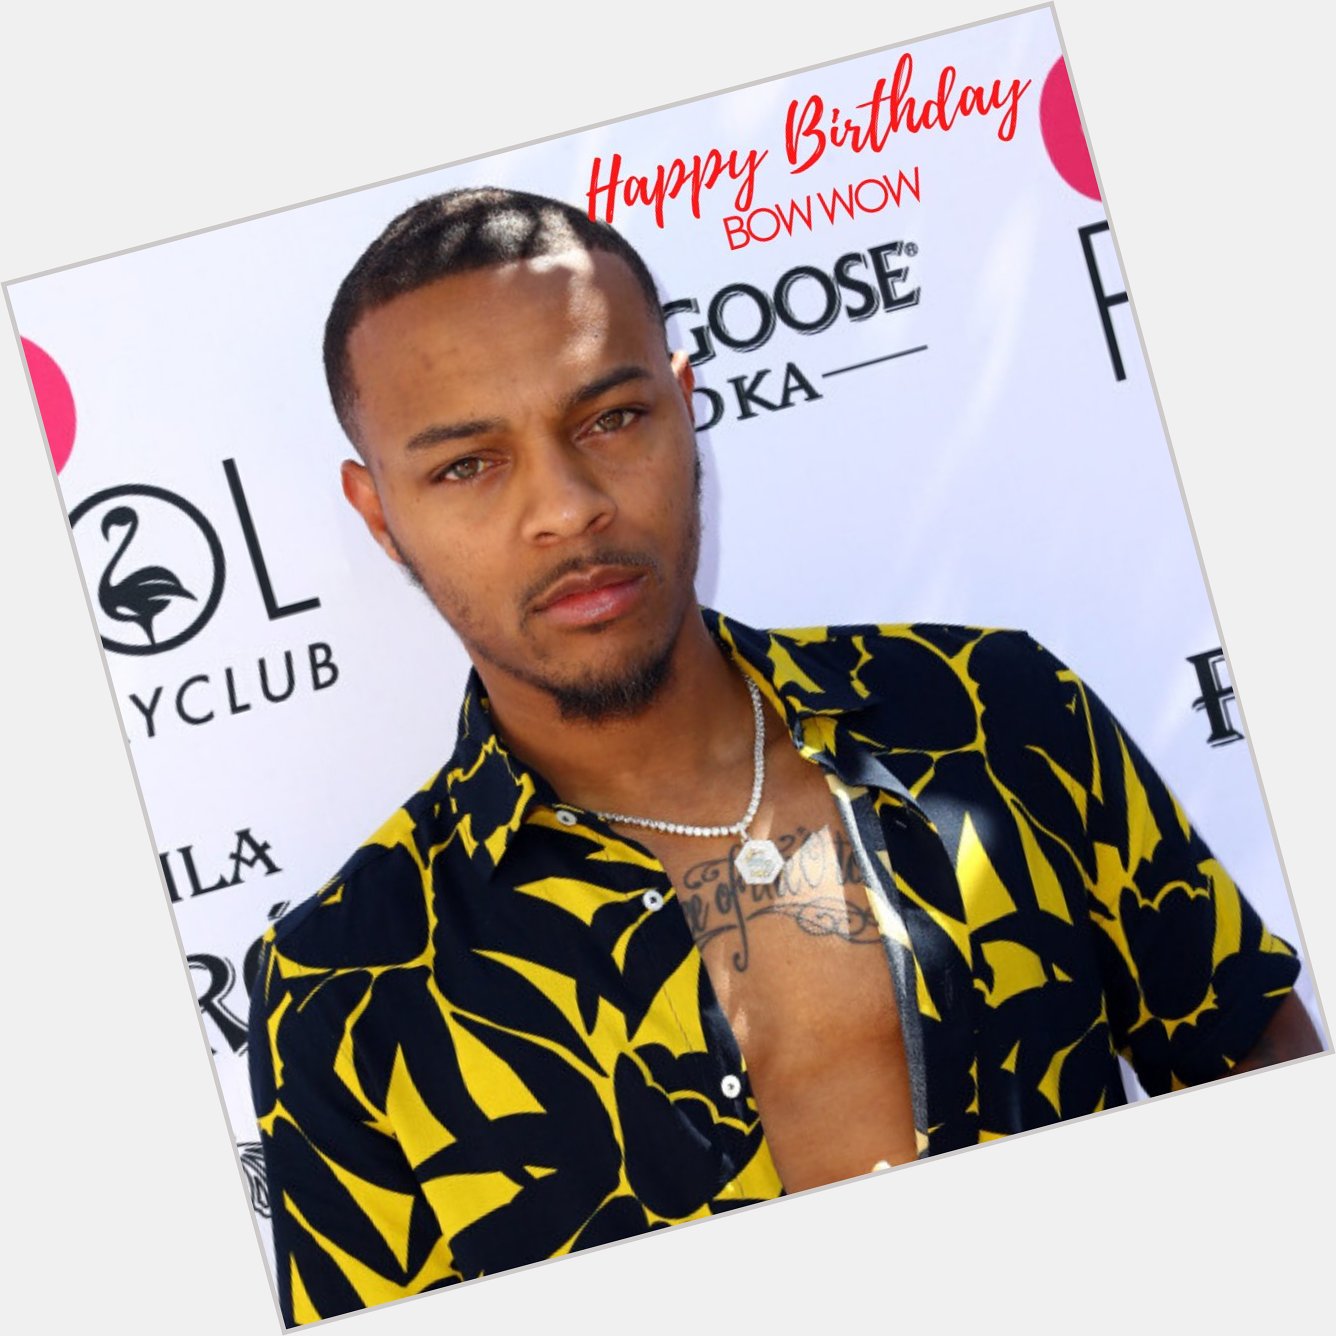 Happy 33rd birthday Bow Wow!! 

Check out his transformation over the years -->  